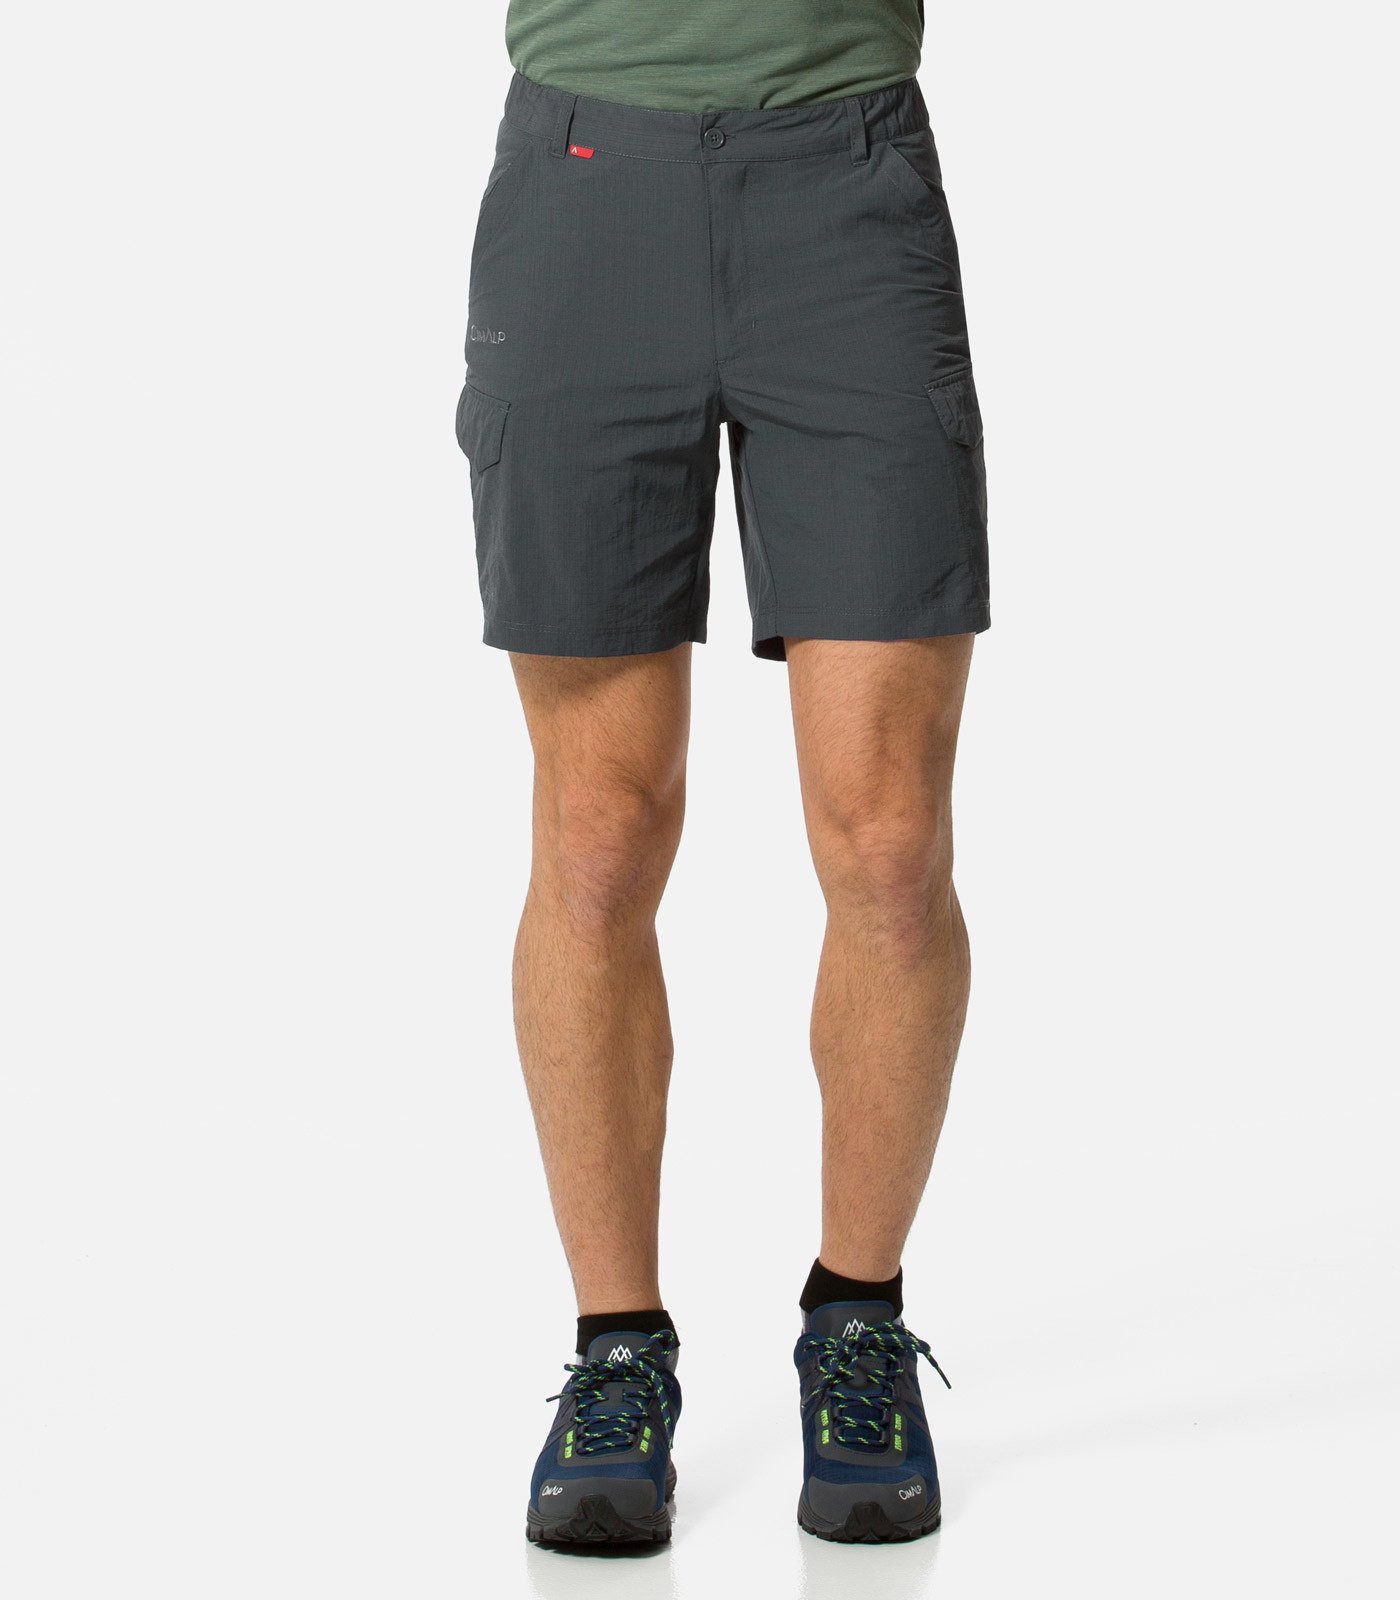 Men's Travel and Hiking shorts